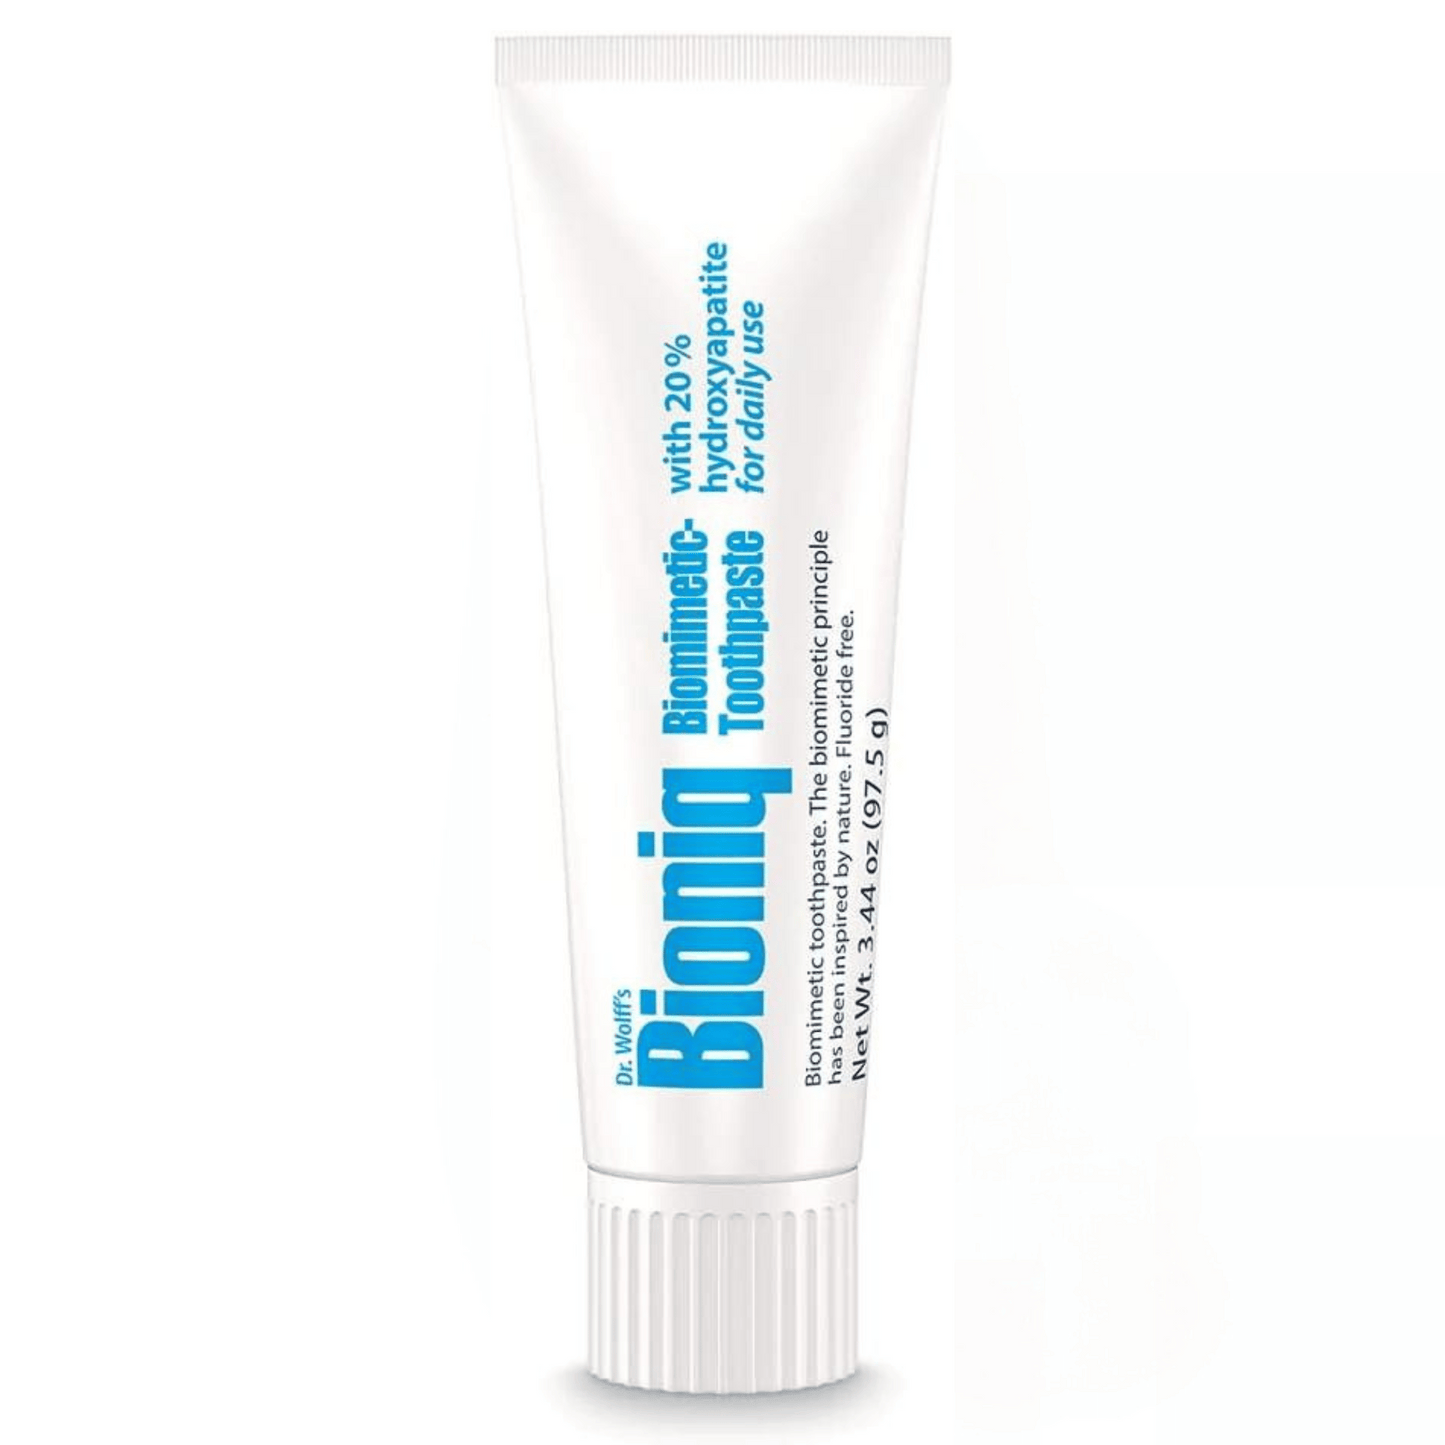 Primary Image of Biomimetic Toothpaste